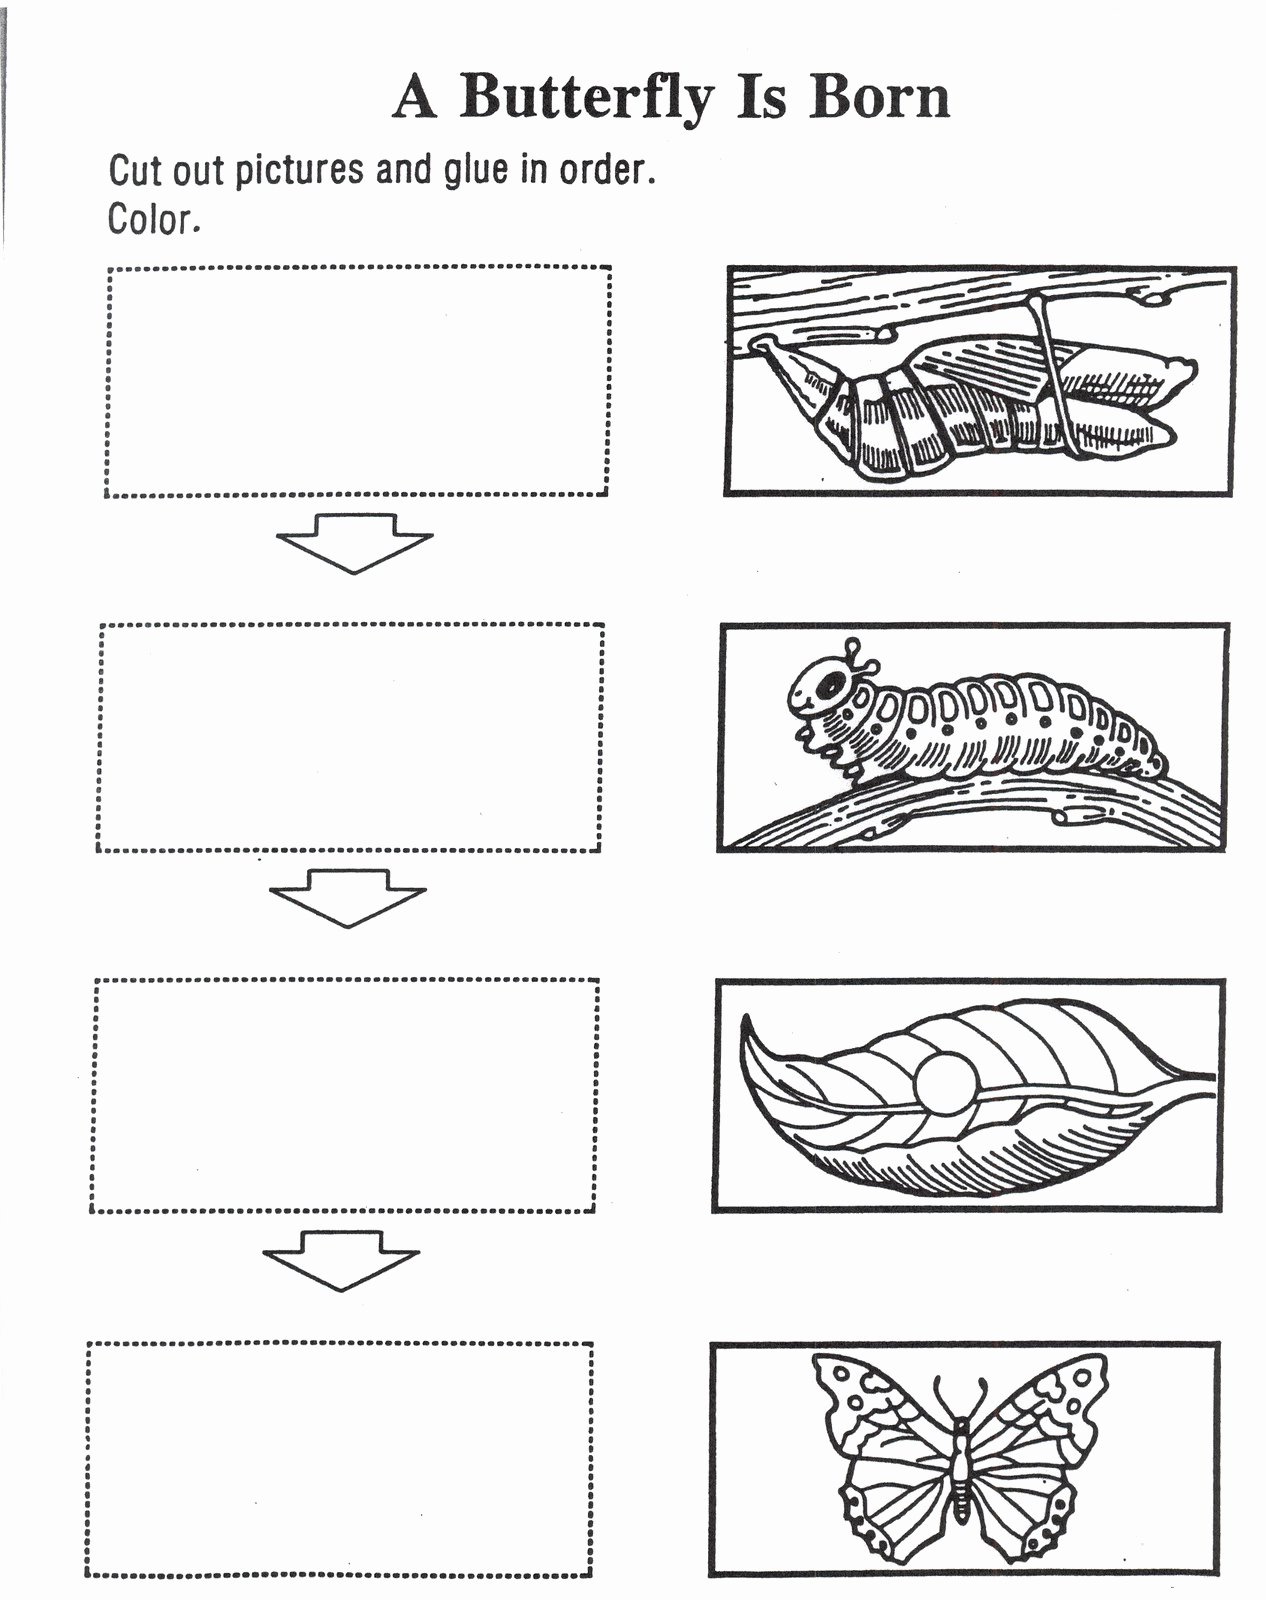 Butterfly Life Cycle Worksheet New butterfly S Life Cycle Activity